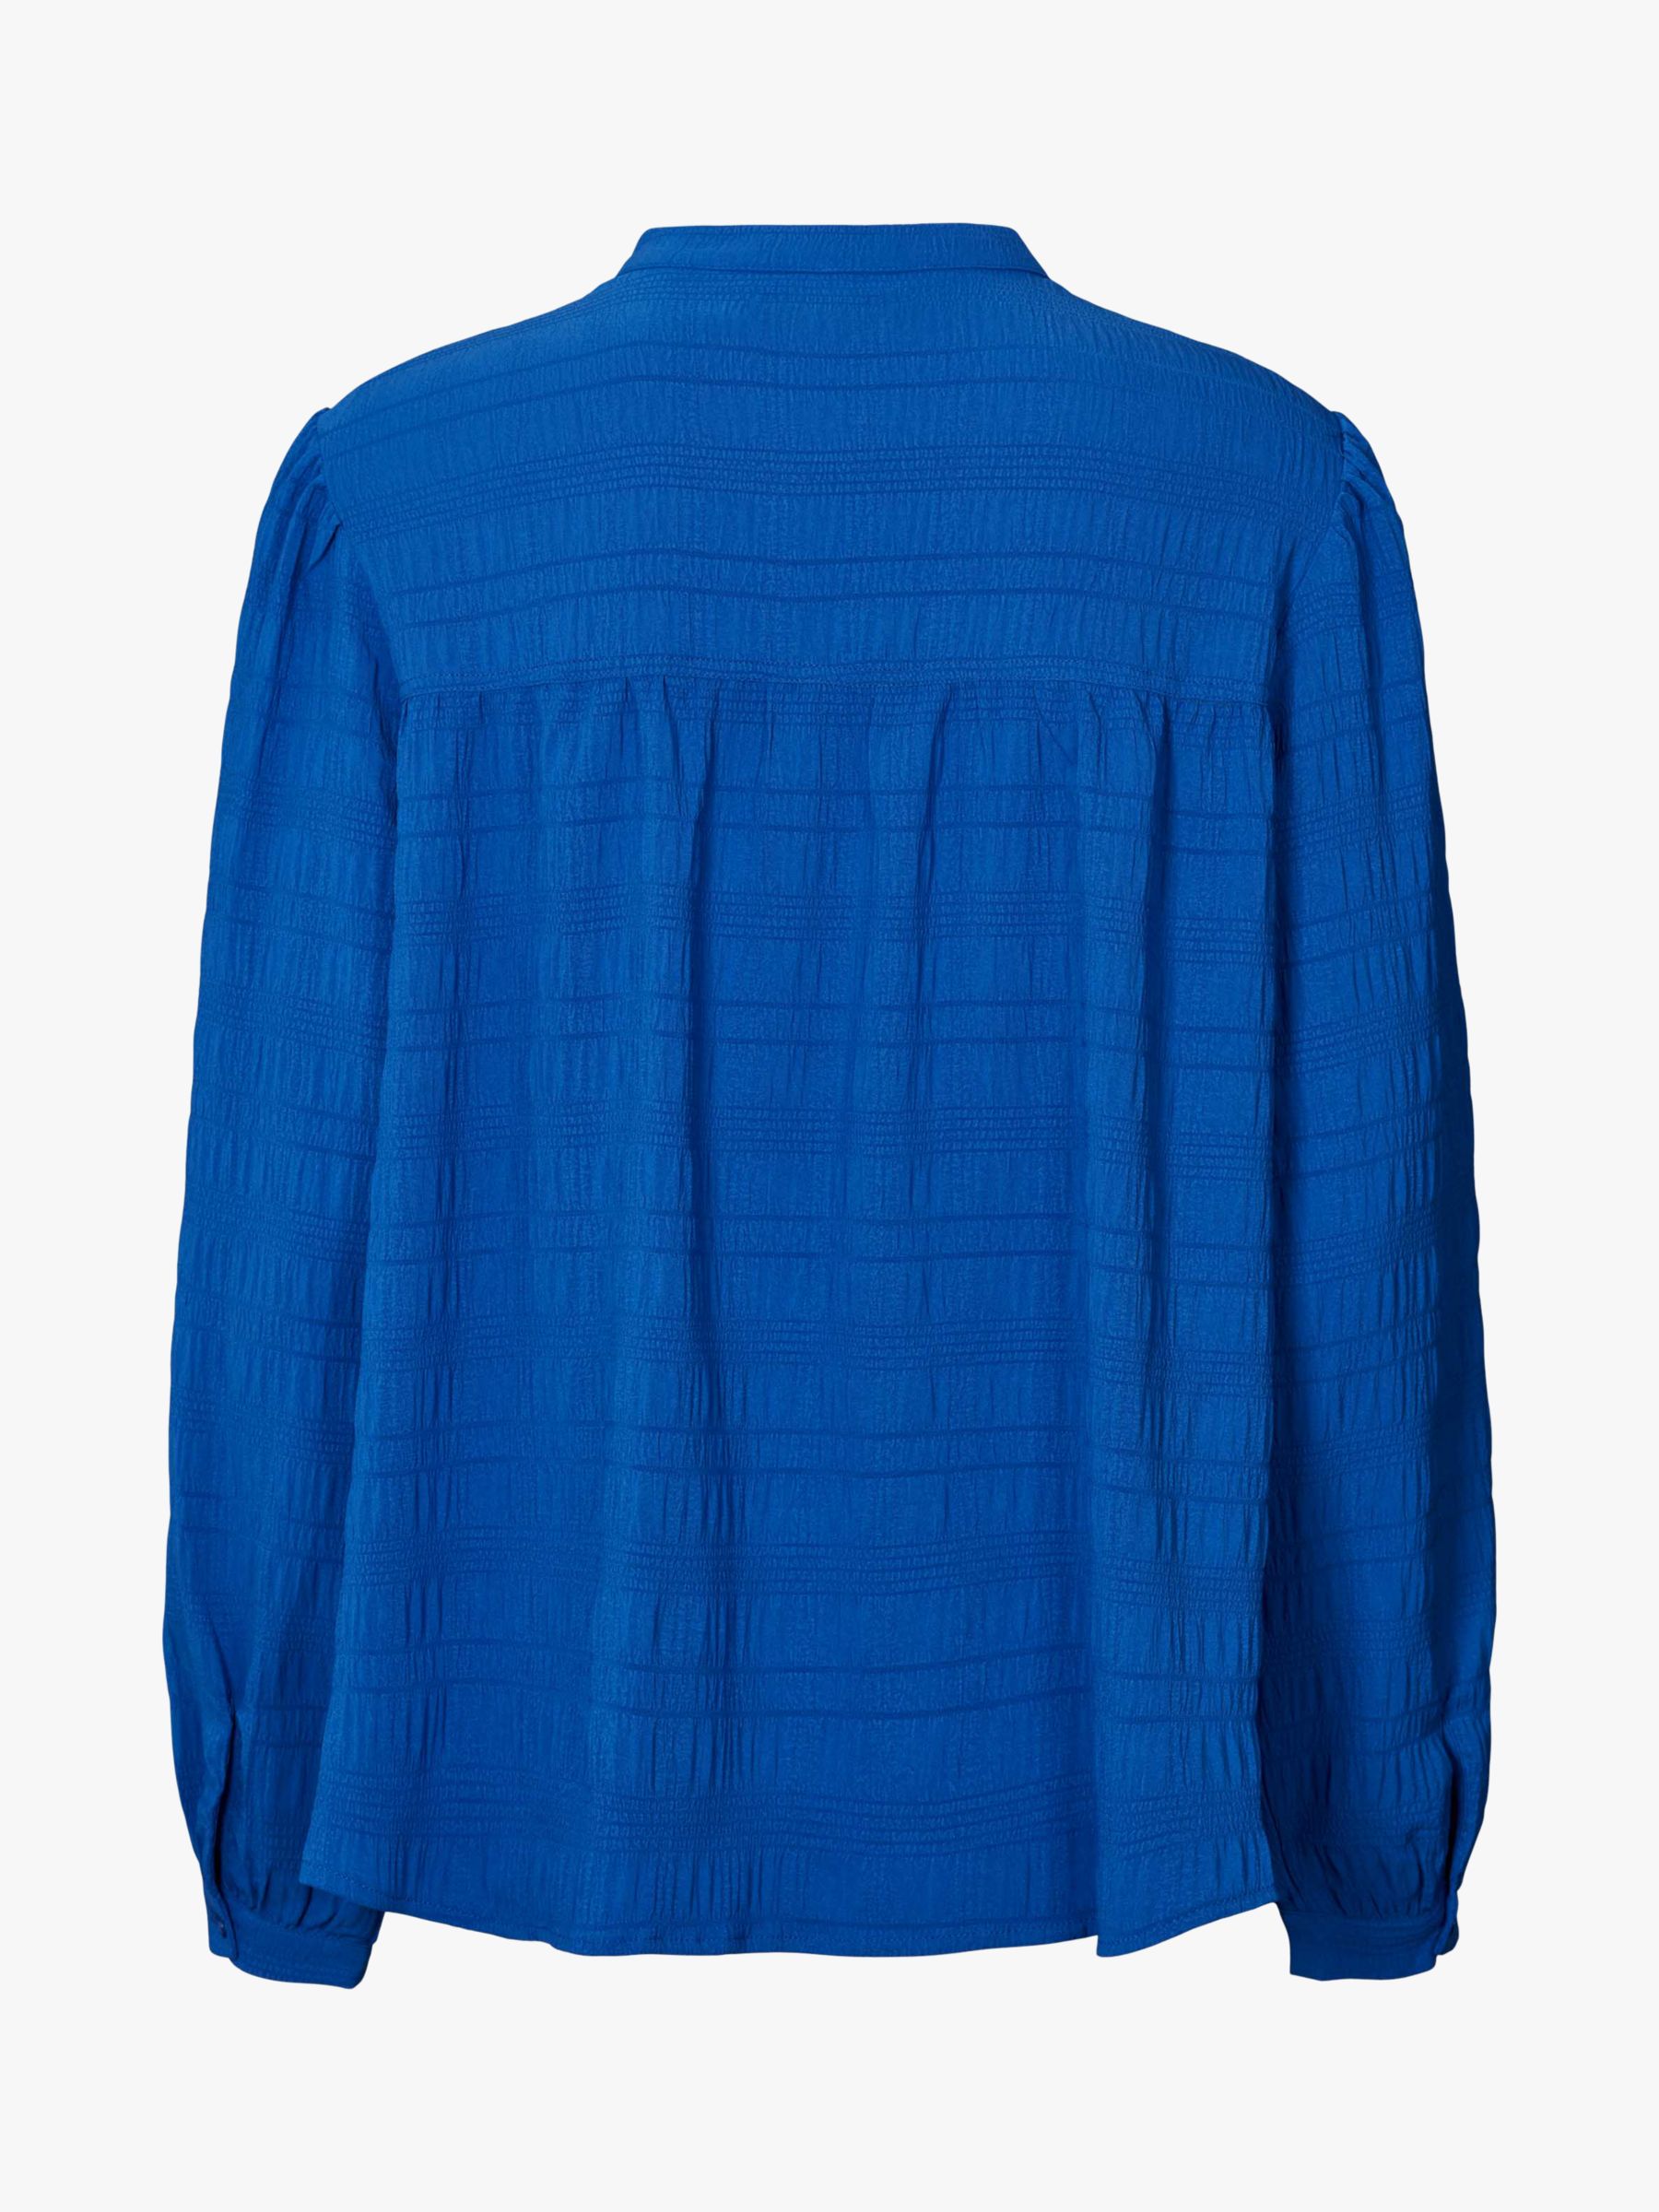 Buy Lollys Laundry Nicky Textured Shirt Online at johnlewis.com